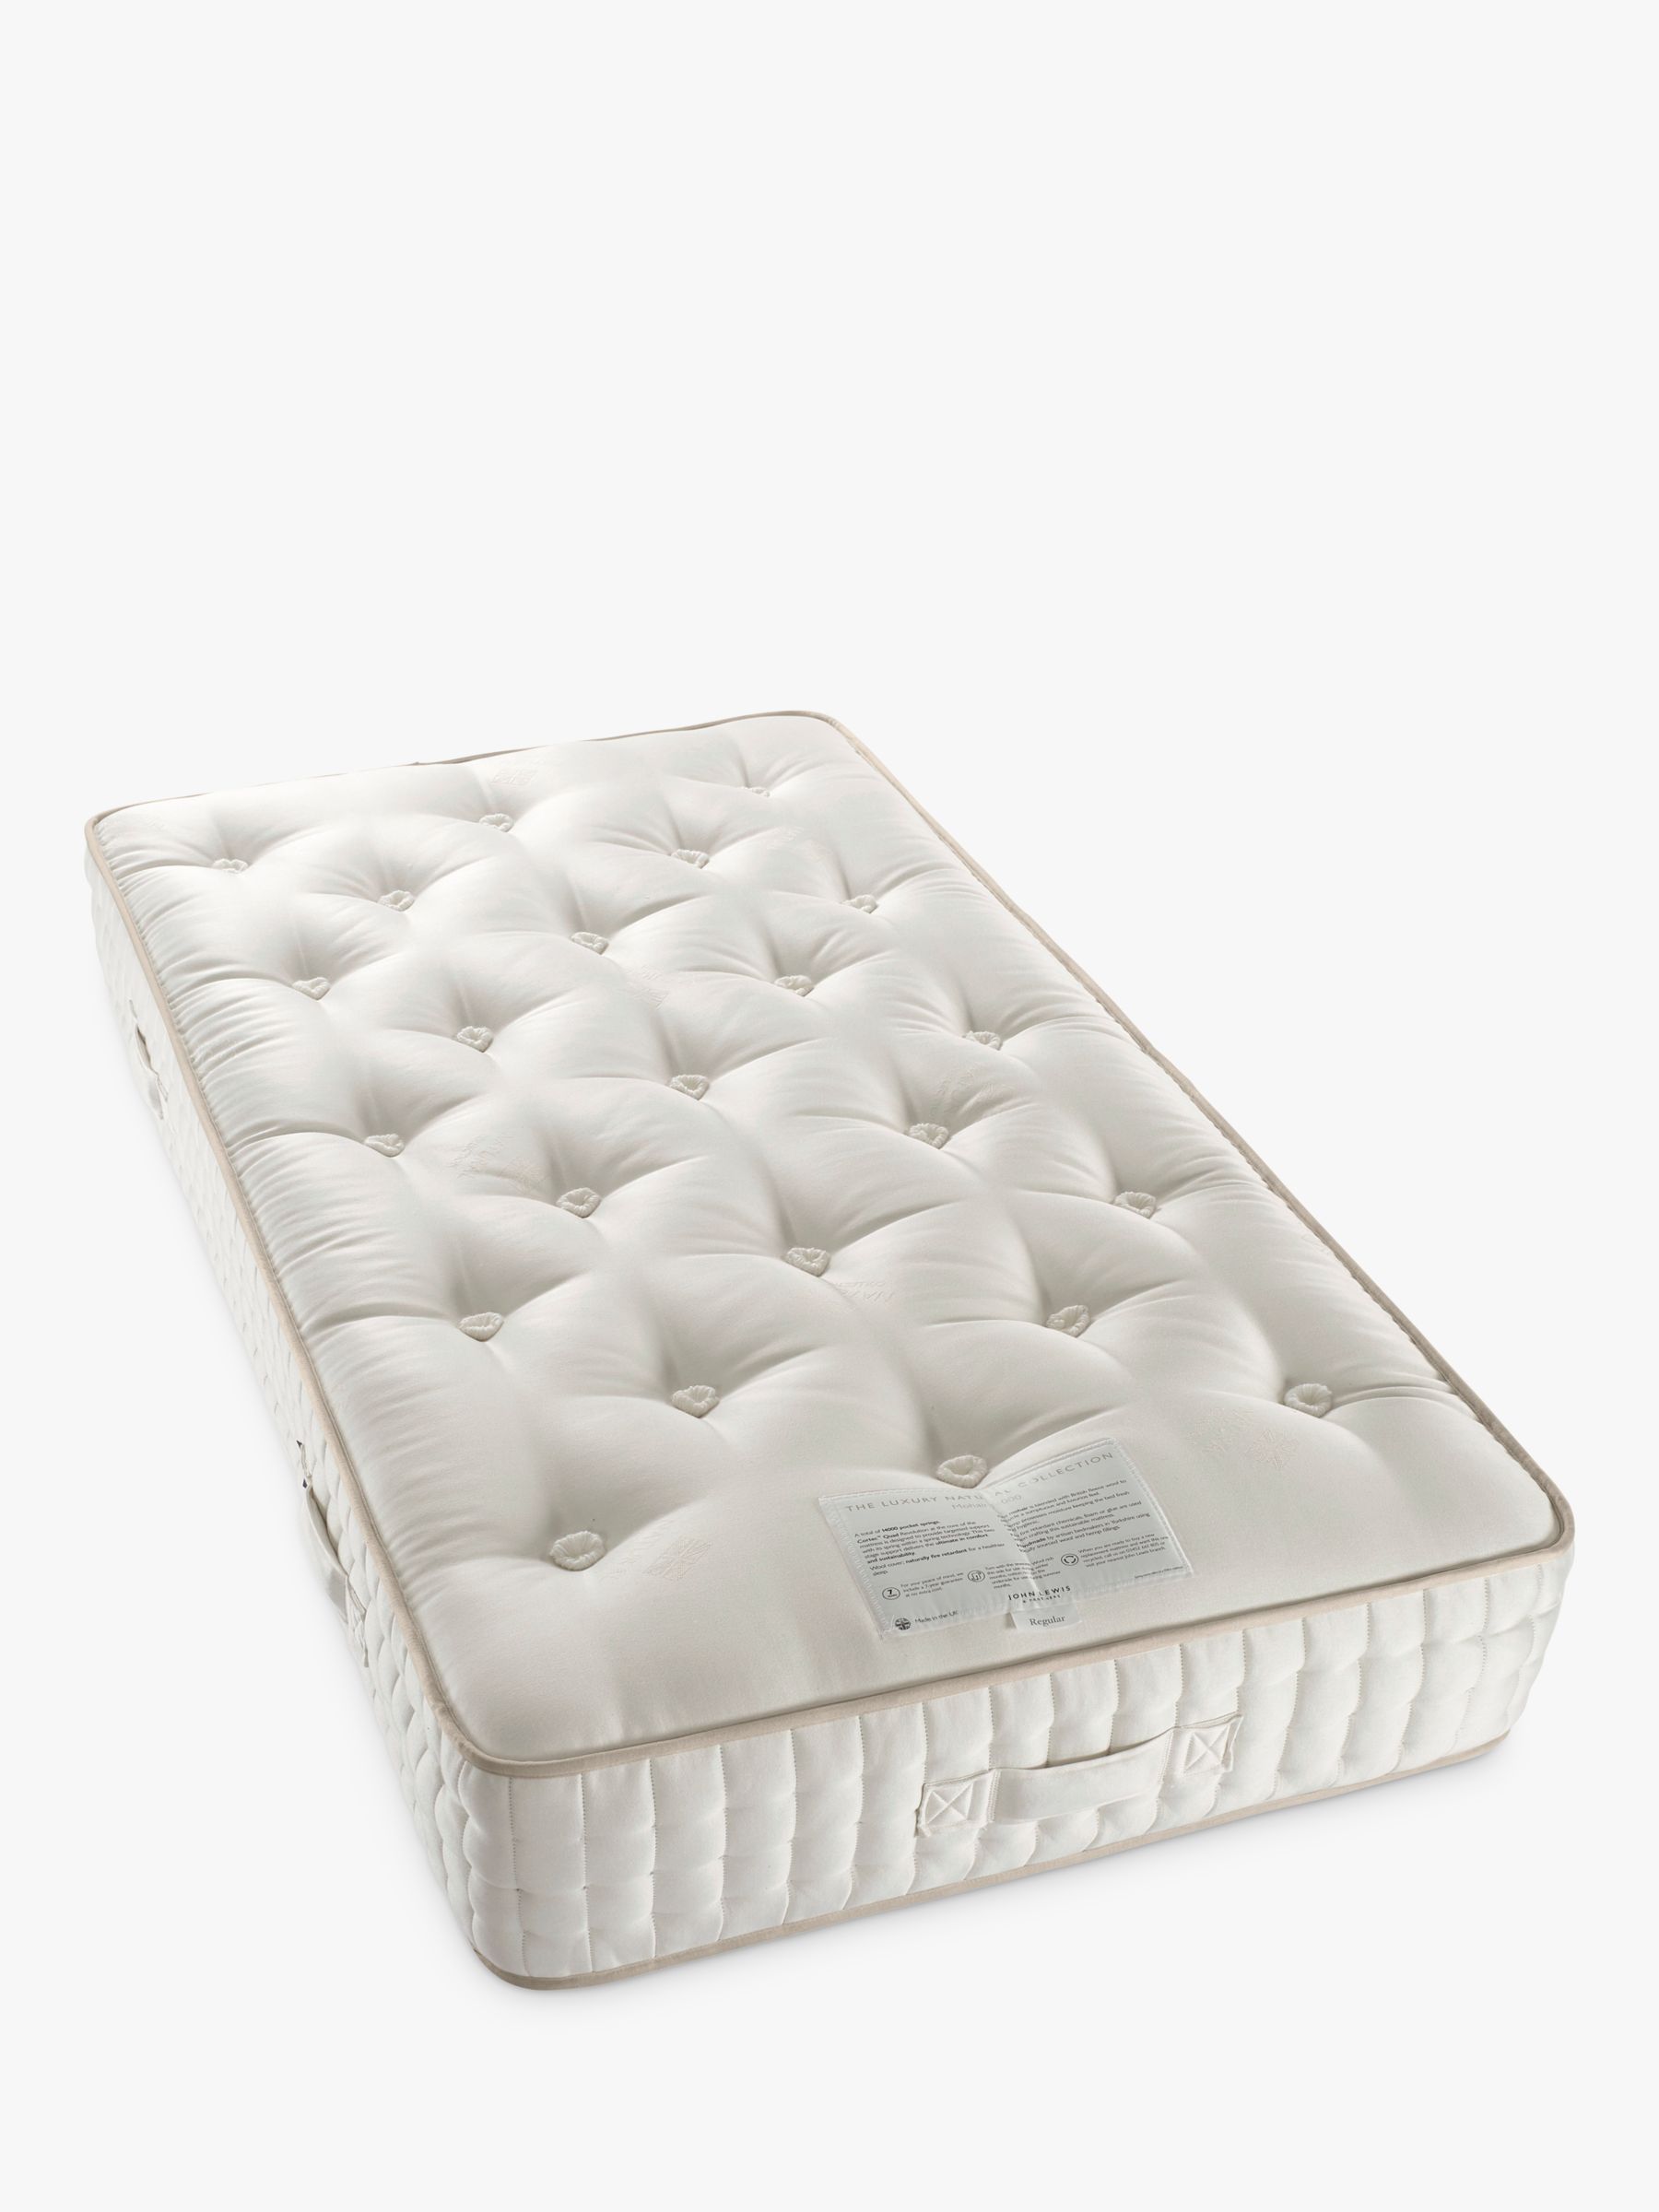 Photo of John lewis luxury natural collection mohair 14000 single firmer tension pocket spring mattress